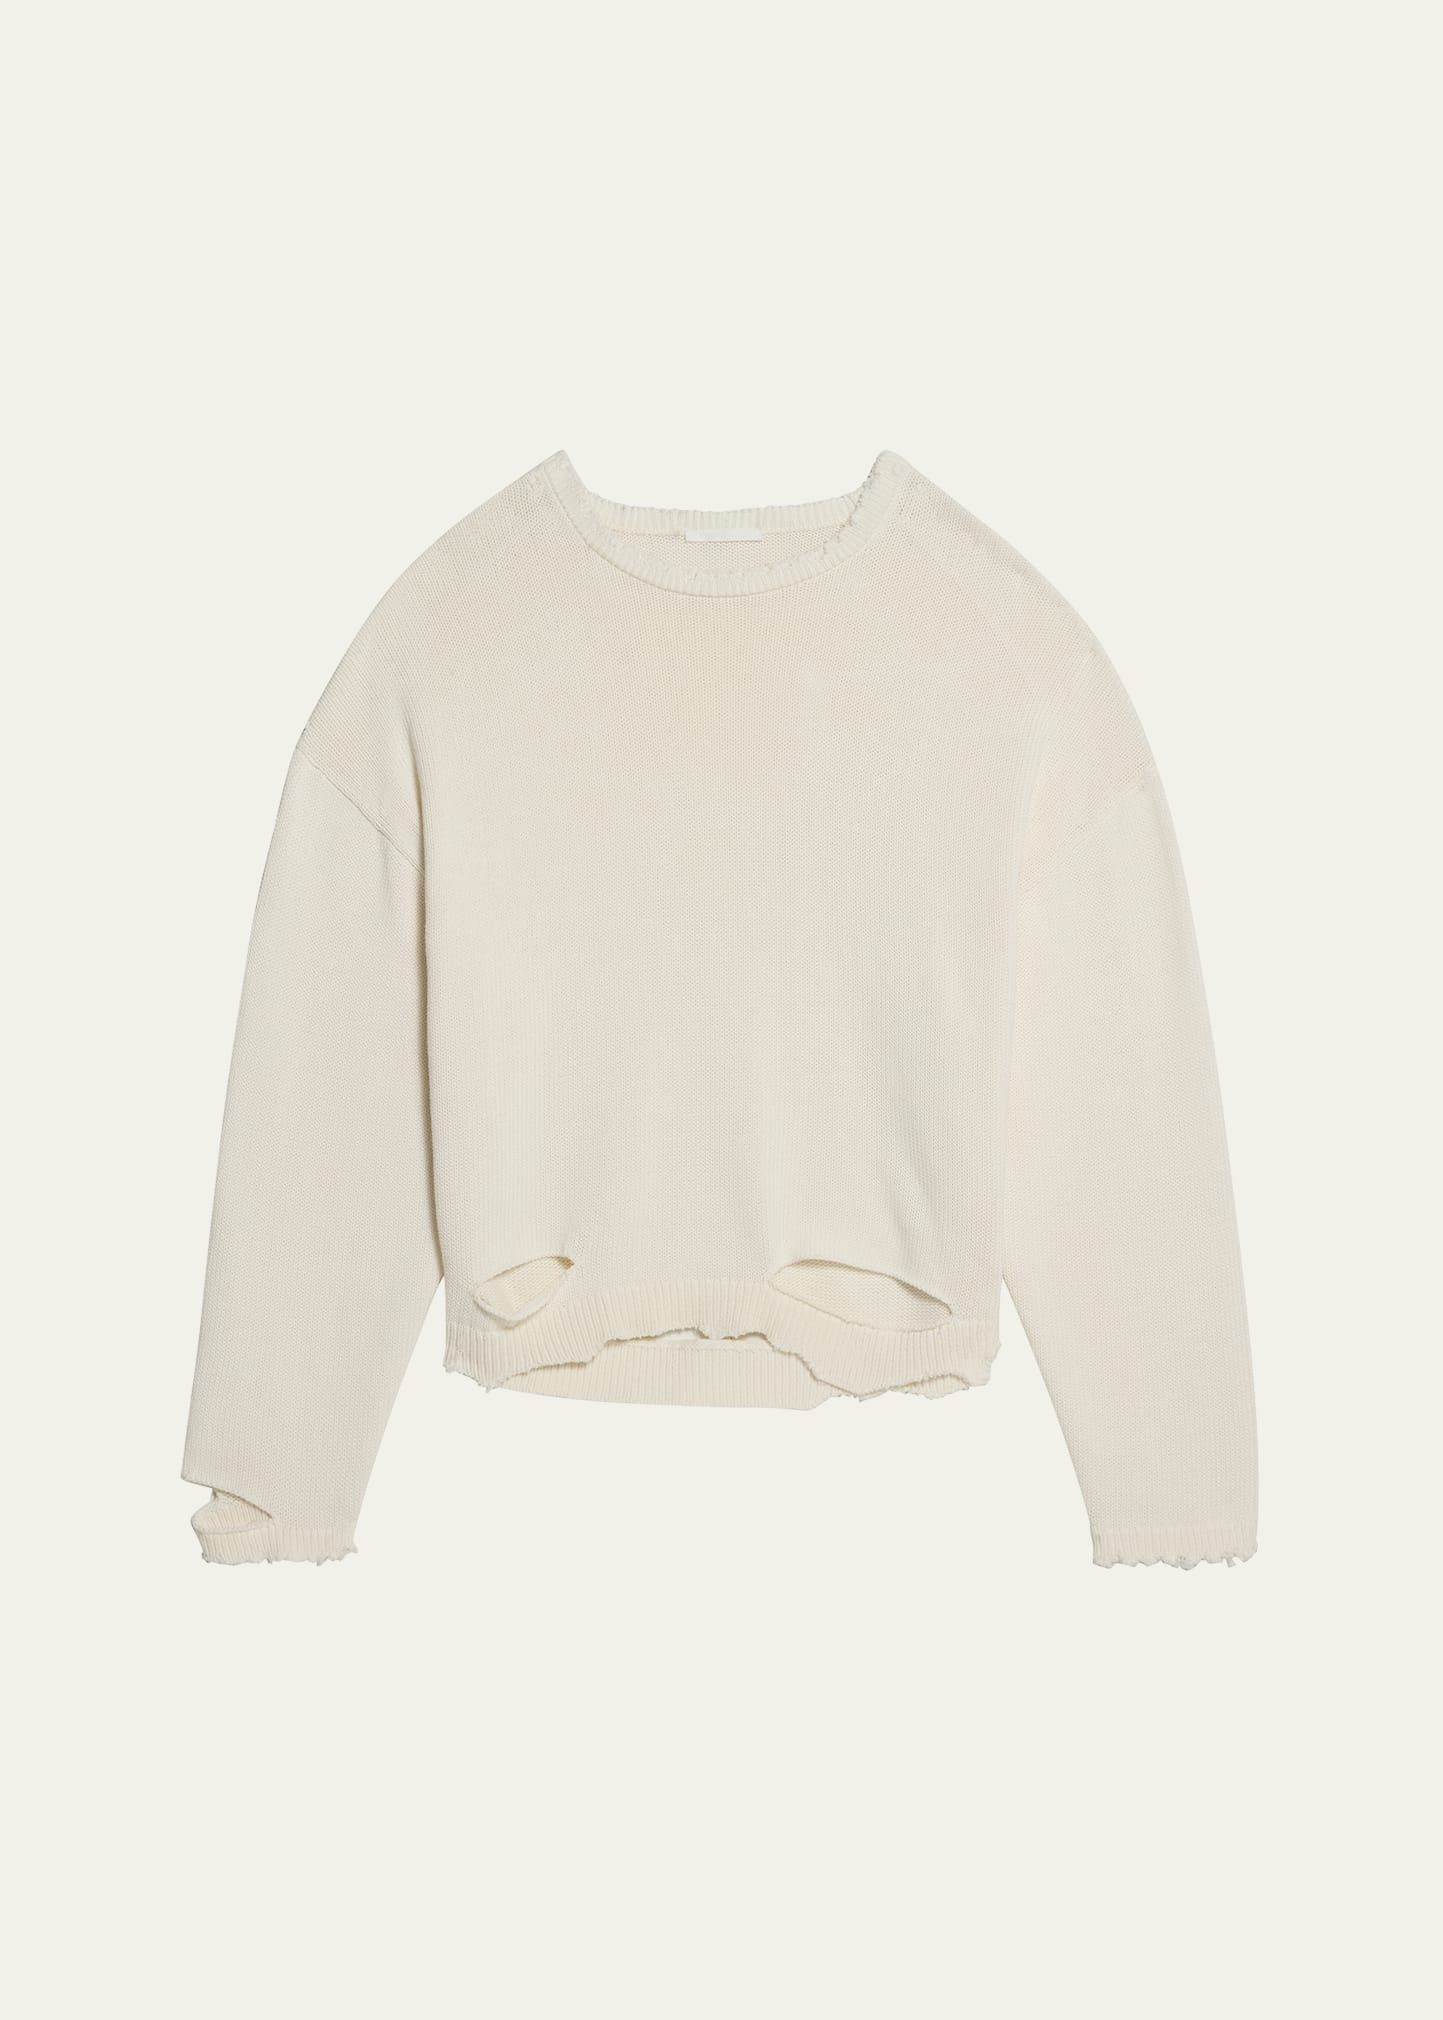 Shop Helmut Lang Men's Distressed Crew Sweater In Ivory